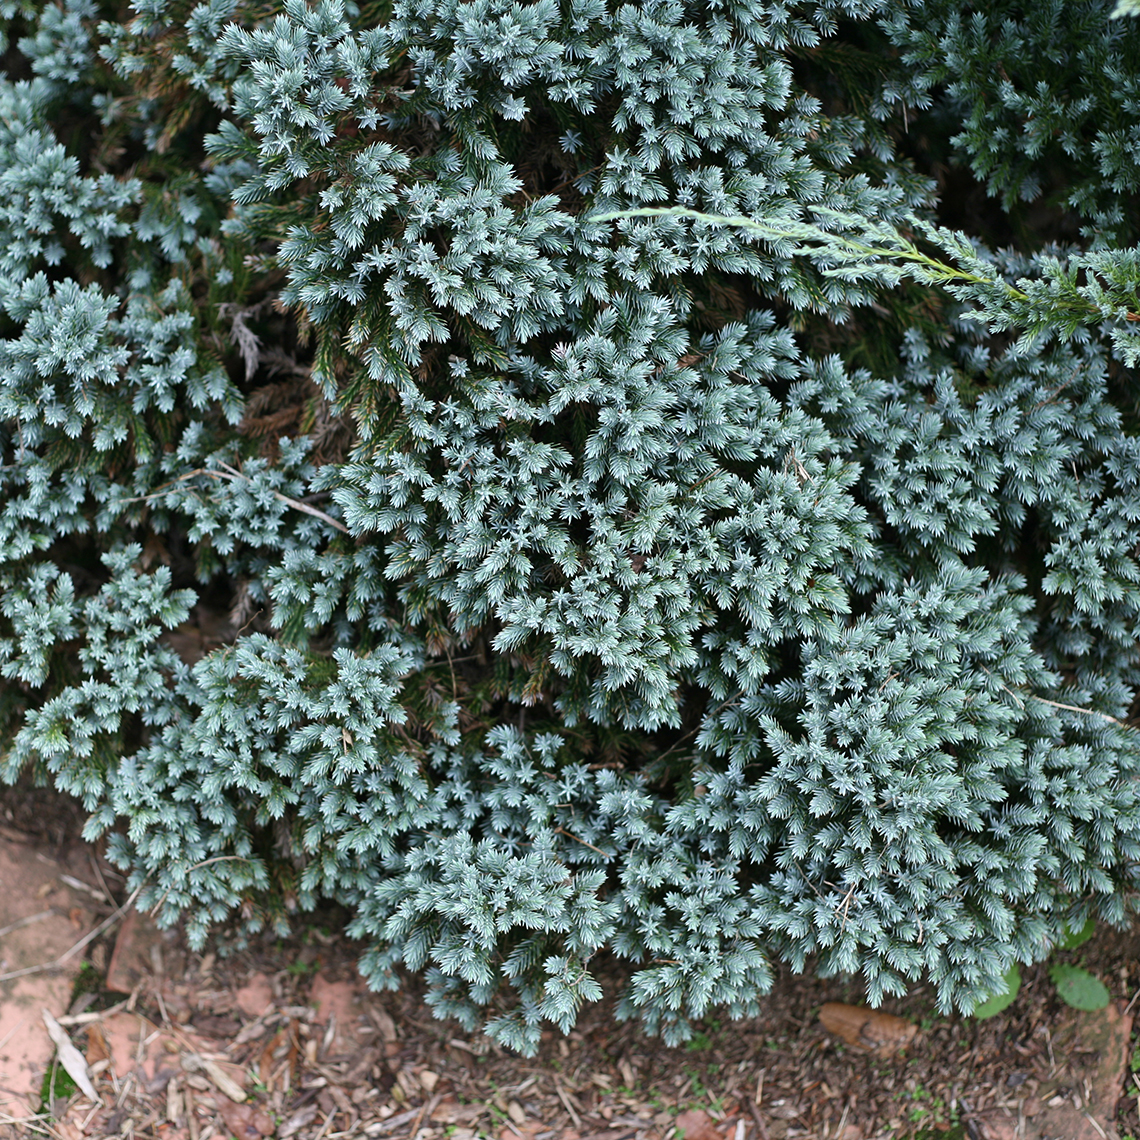 Overhead look at the heavily textured Juniperus Blue Star